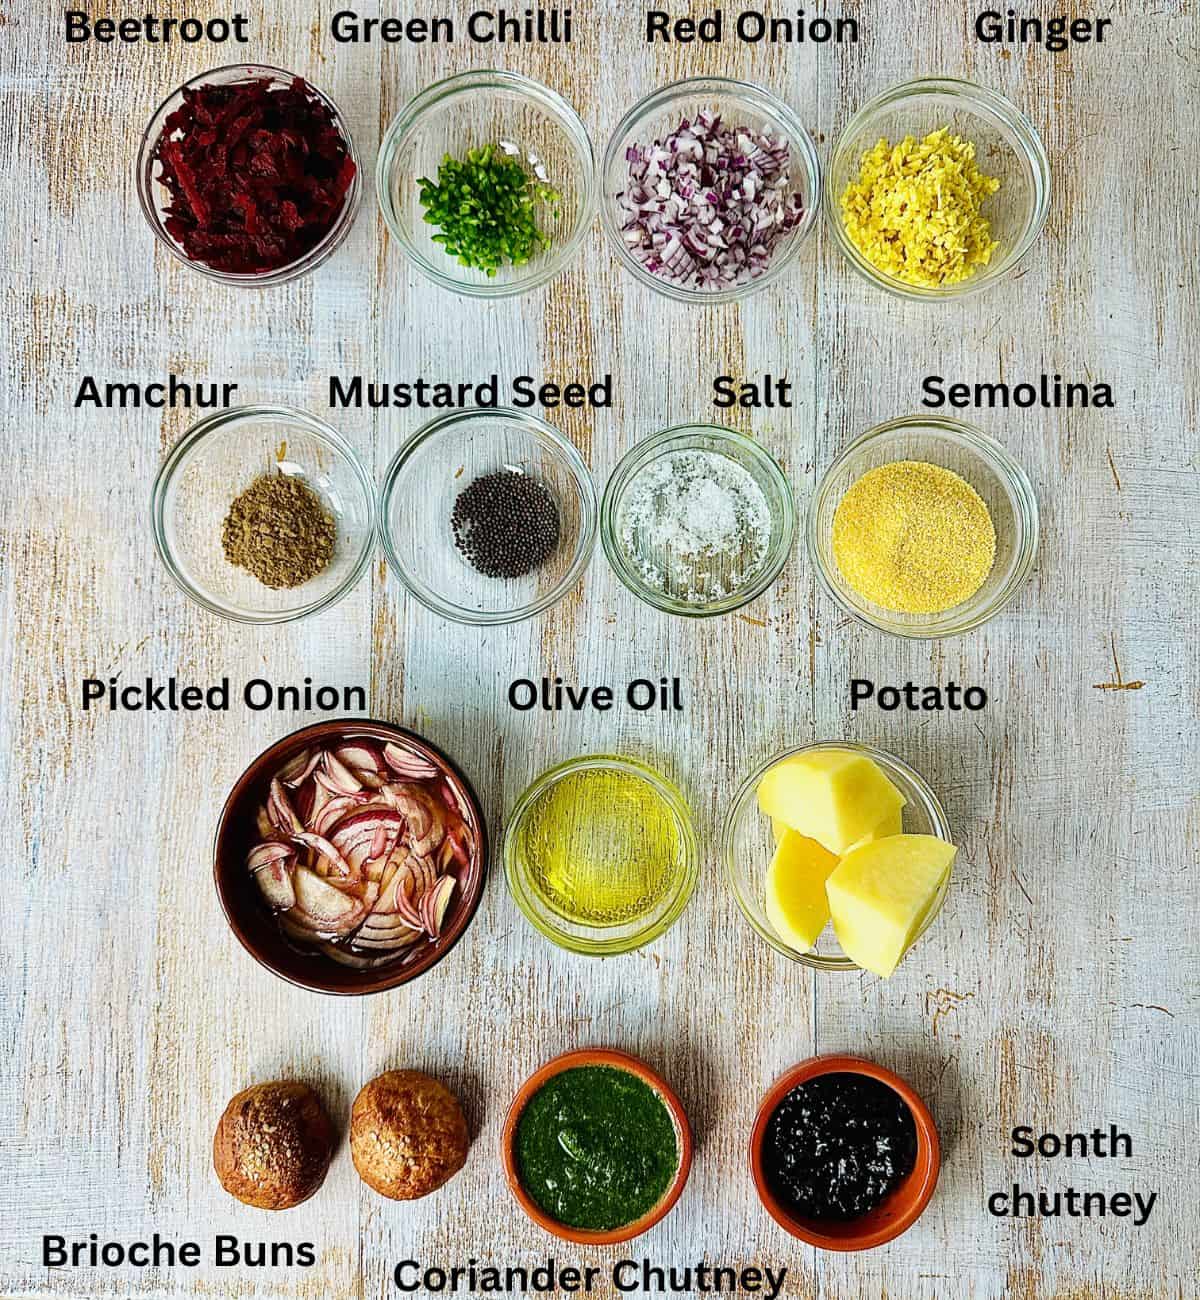 Prepared ingredients for beetroot burgers in small glass dishes. Annotated.